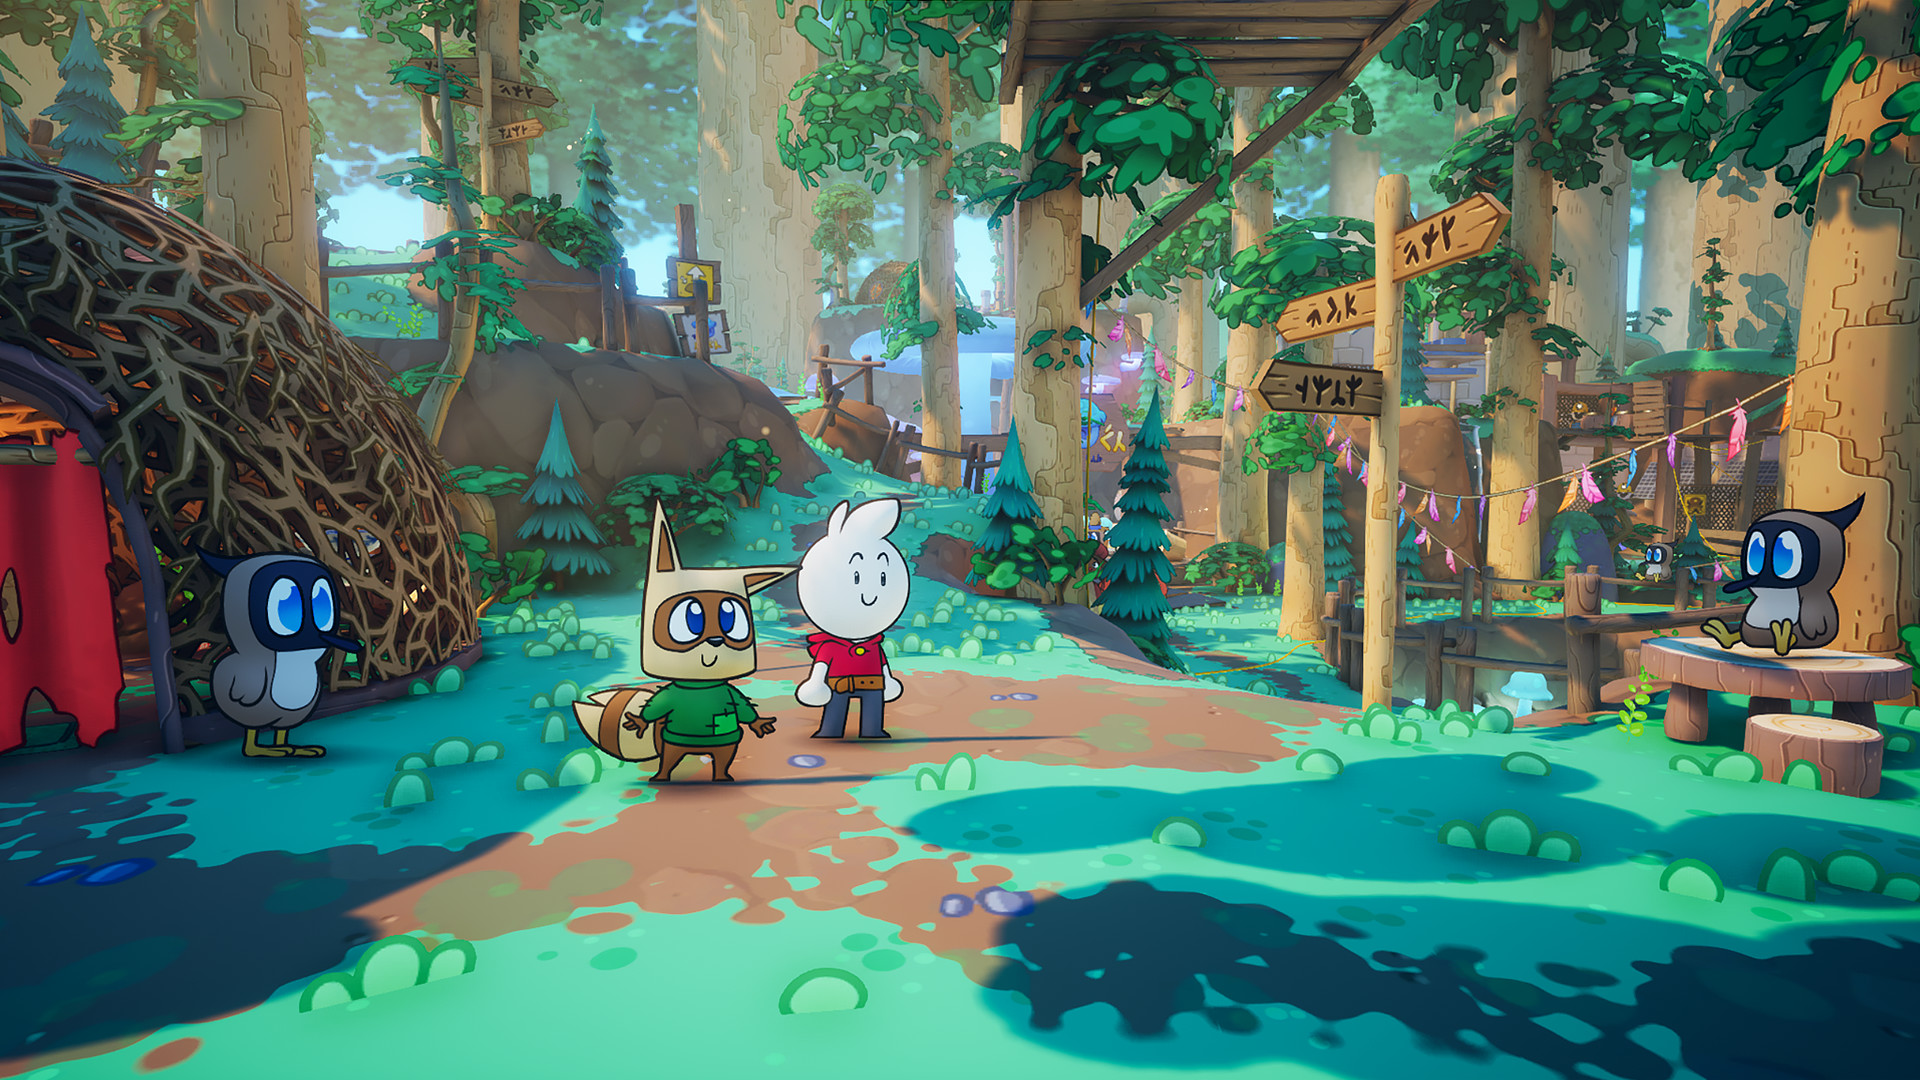 Born of Bread Takes Inspiration From Paper Mario, Headed to PC